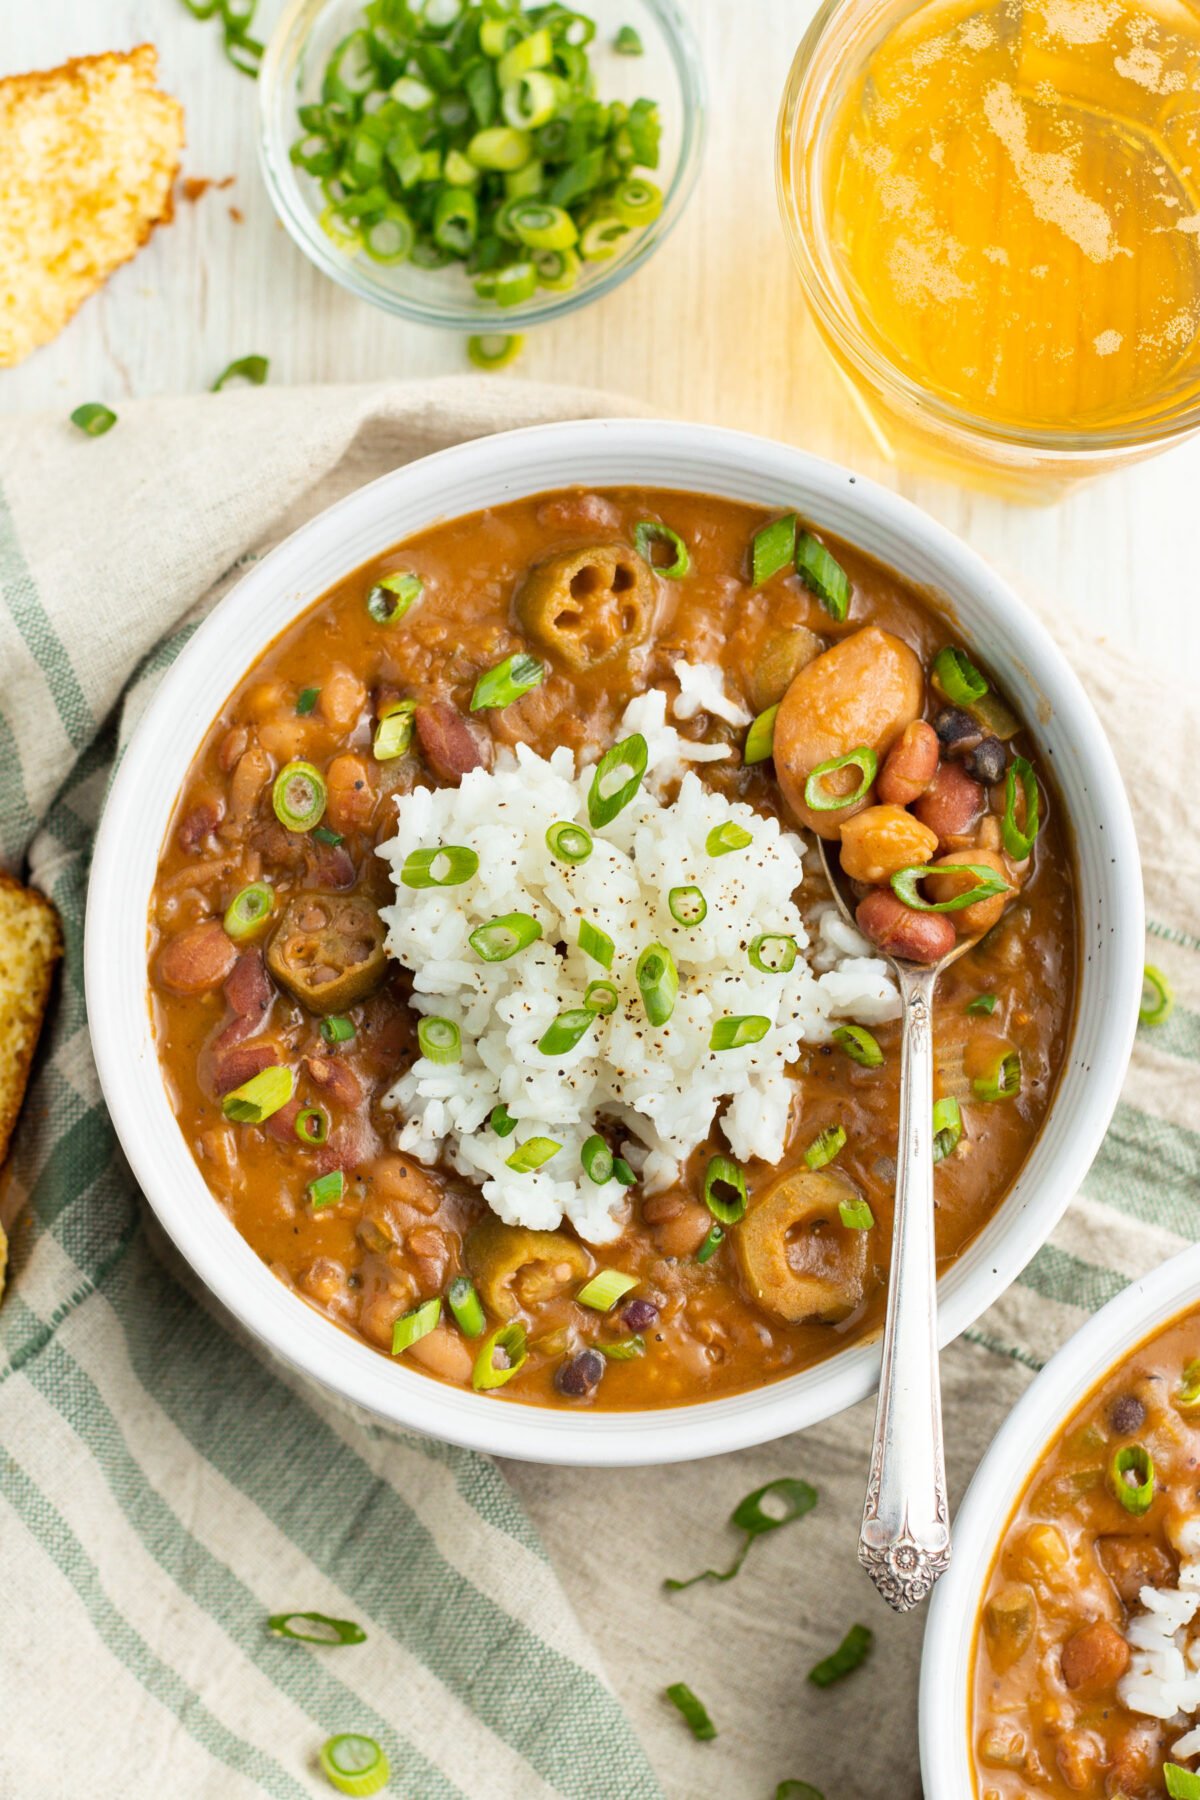 Overhead photo of a white bowl filled with reddish-brown Cajun 15-bean vegetarian gumbo, topped with rice and slices of green onion.